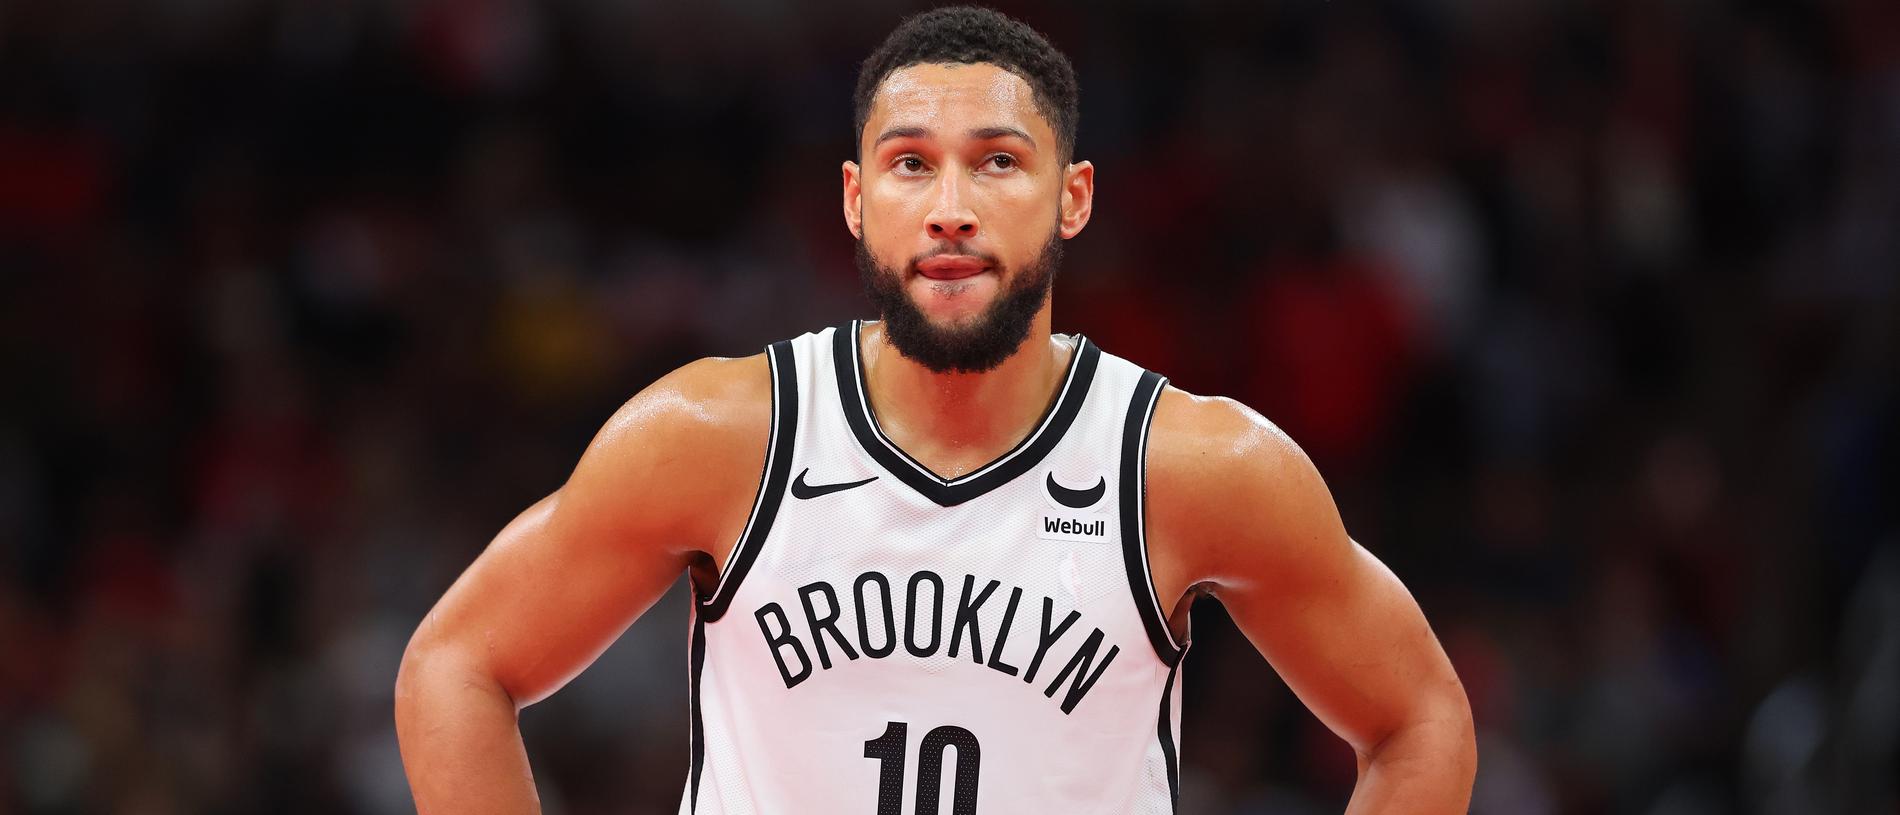 CHICAGO, ILLINOIS - NOVEMBER 03: Ben Simmons #10 of the Brooklyn Nets looks on against the Chicago Bulls in the second half of the NBA In-Season Tournament at the United Center on November 03, 2023 in Chicago, Illinois. NOTE TO USER: User expressly acknowledges and agrees that, by downloading and or using this photograph, User is consenting to the terms and conditions of the Getty Images License Agreement. (Photo by Michael Reaves/Getty Images)